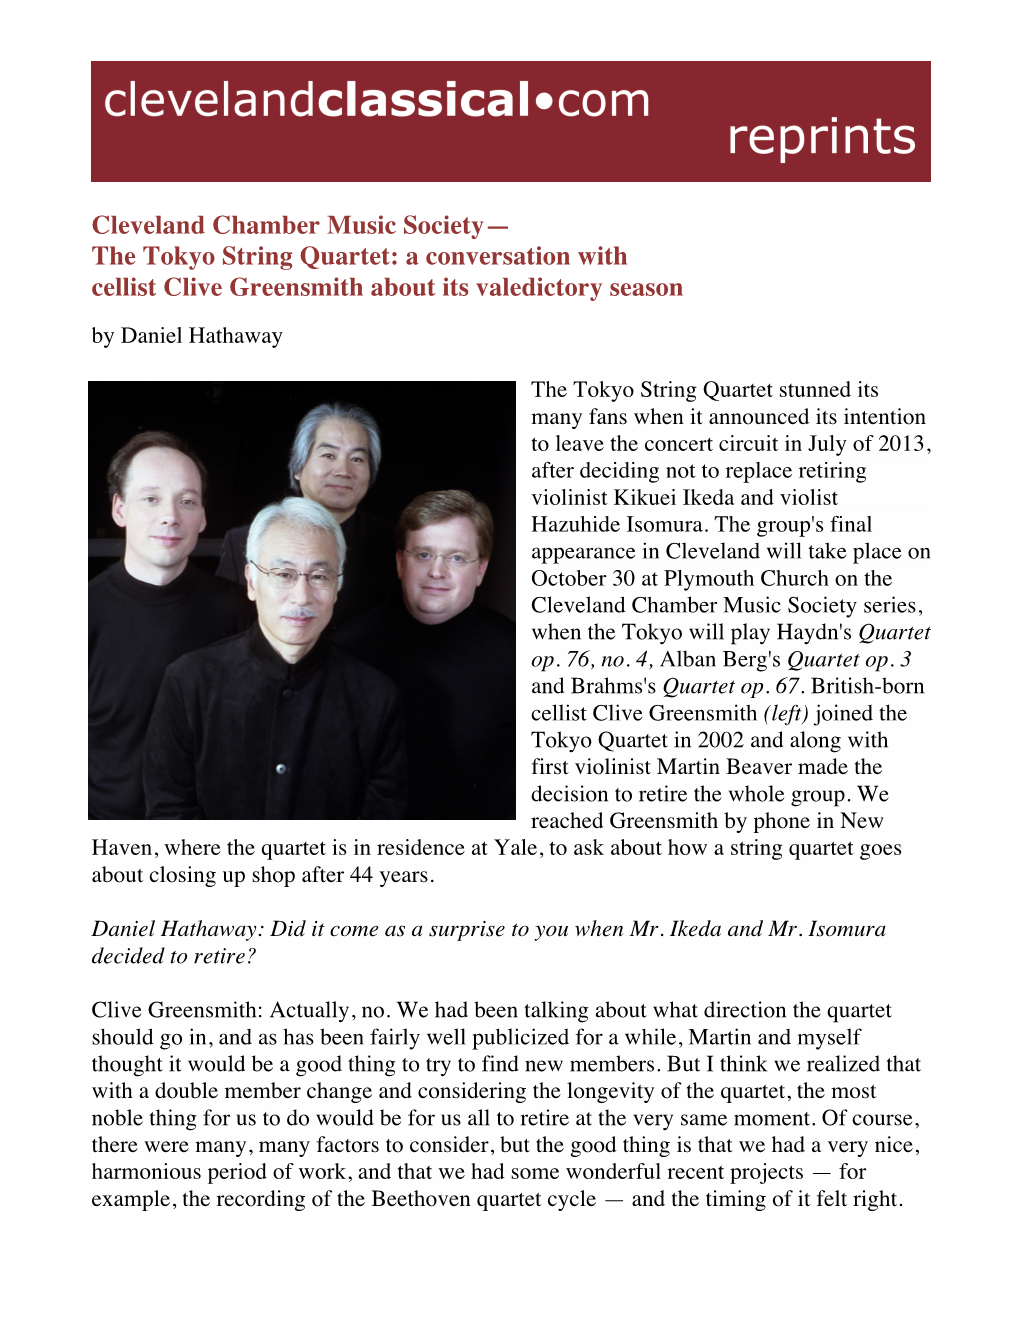 The Tokyo String Quartet: a Conversation with Cellist Clive Greensmith About Its Valedictory Season by Daniel Hathaway